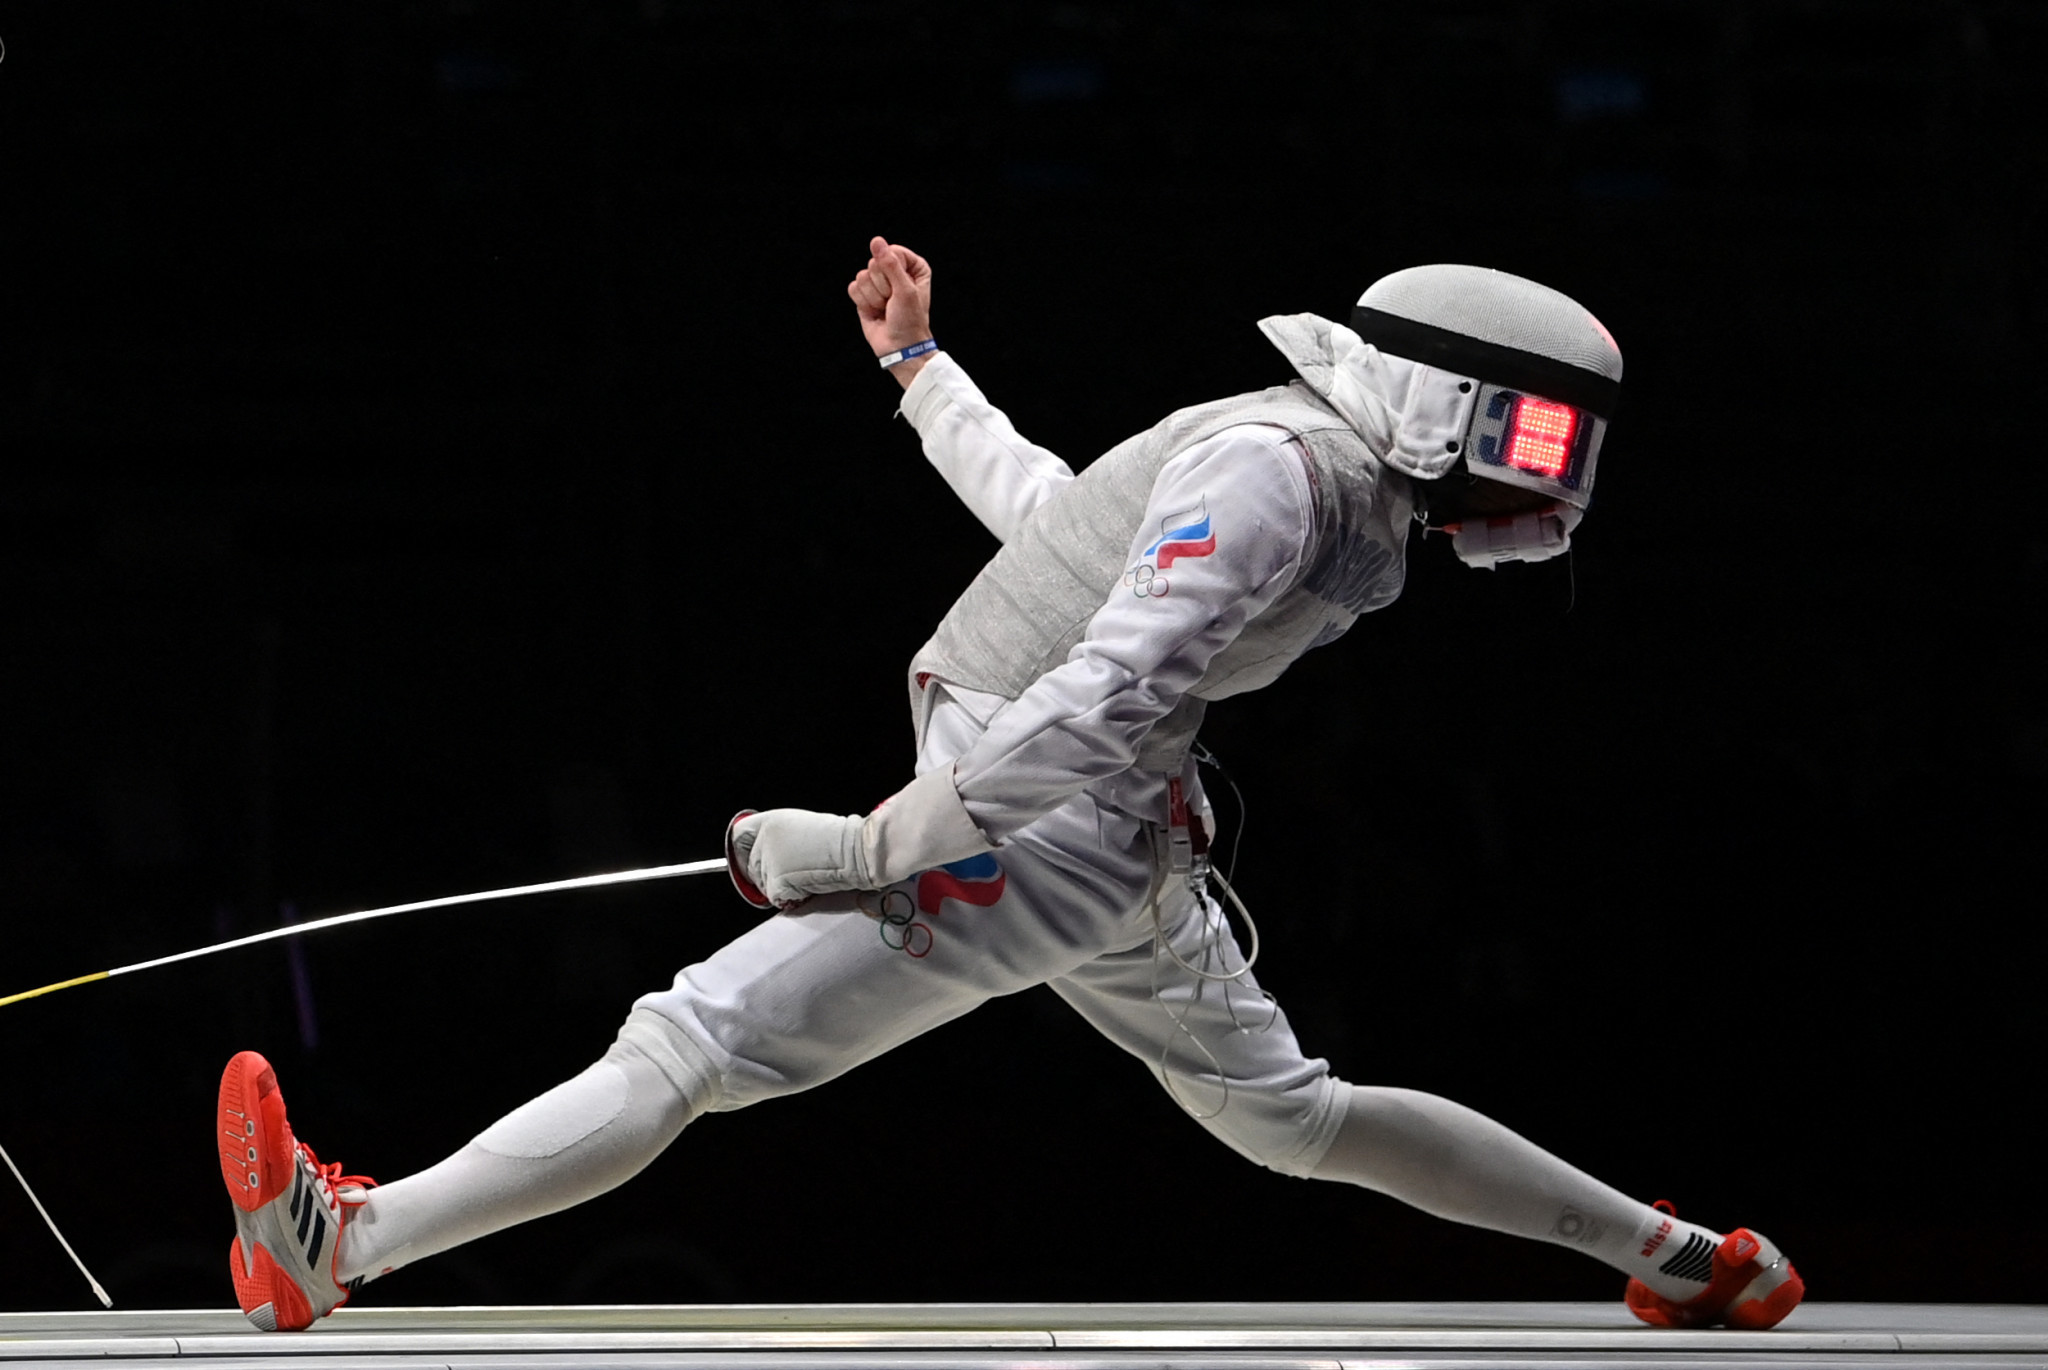 Russia have finished top of the fencing medals table at both Rio 2016 and Tokyo 2020 under the leadership of Ilgar Mammadov ©Getty Images